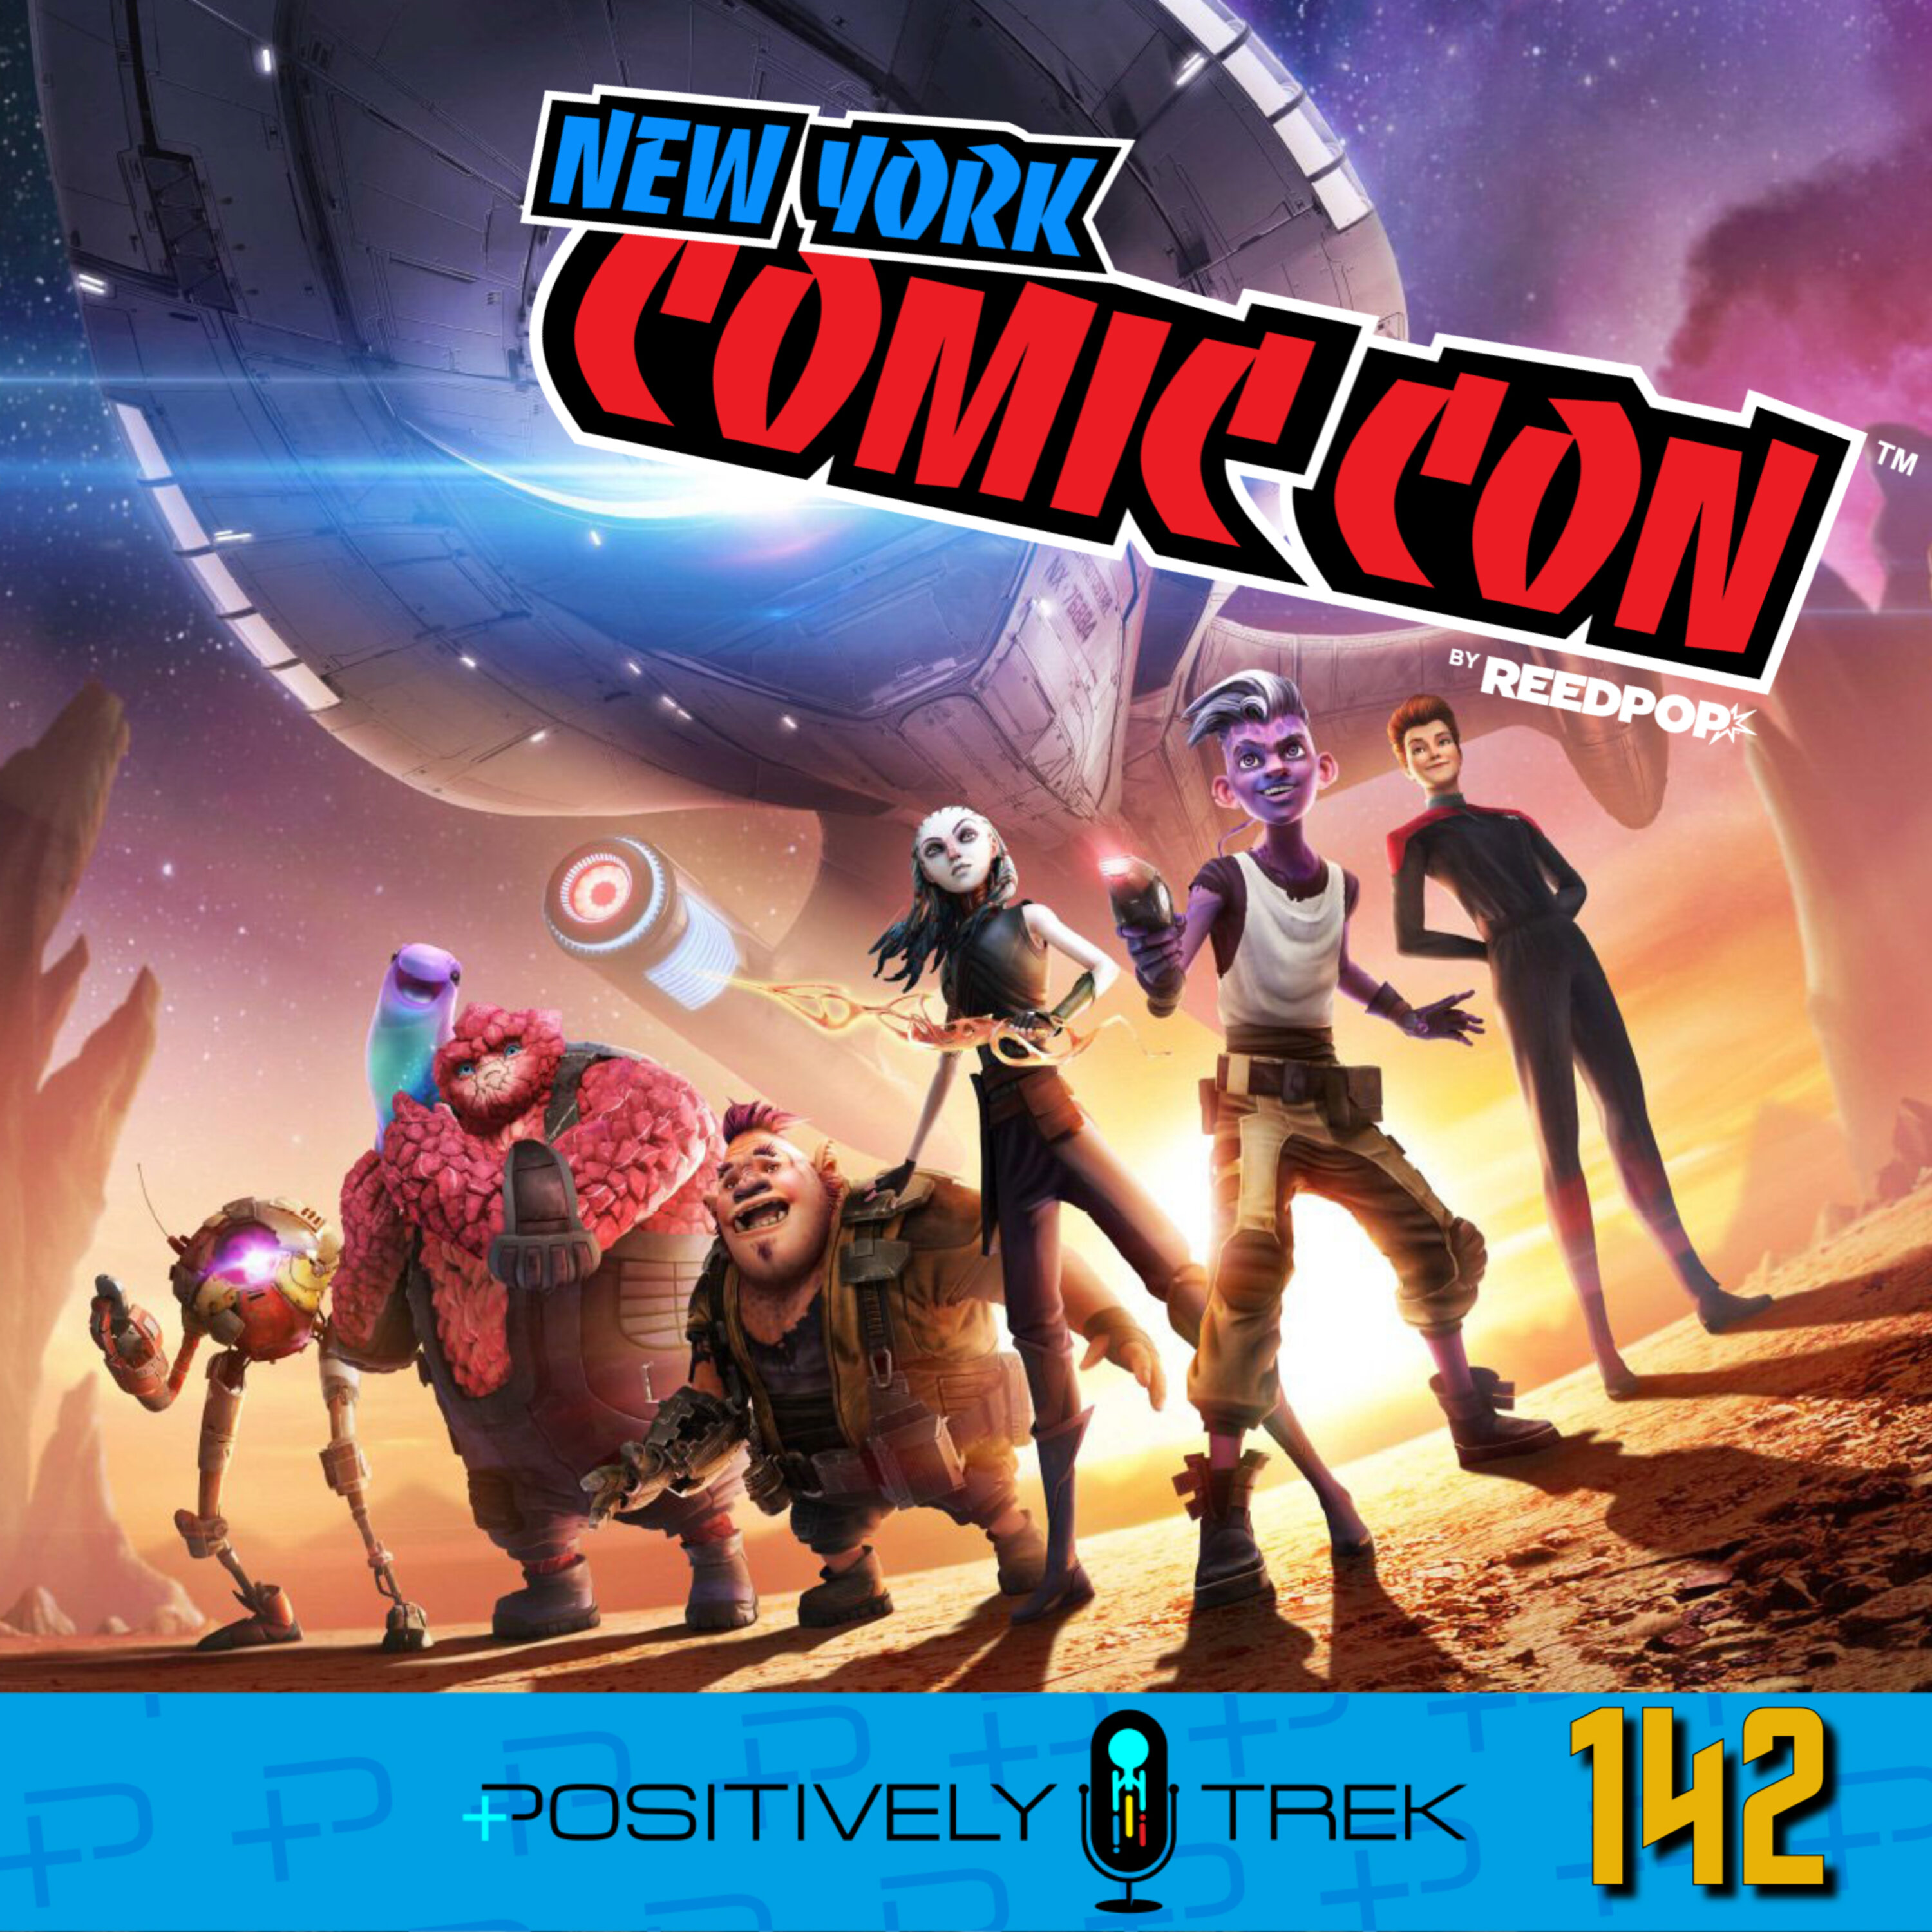 Discovery & Prodigy at NYCC, Trek Film News, and More!